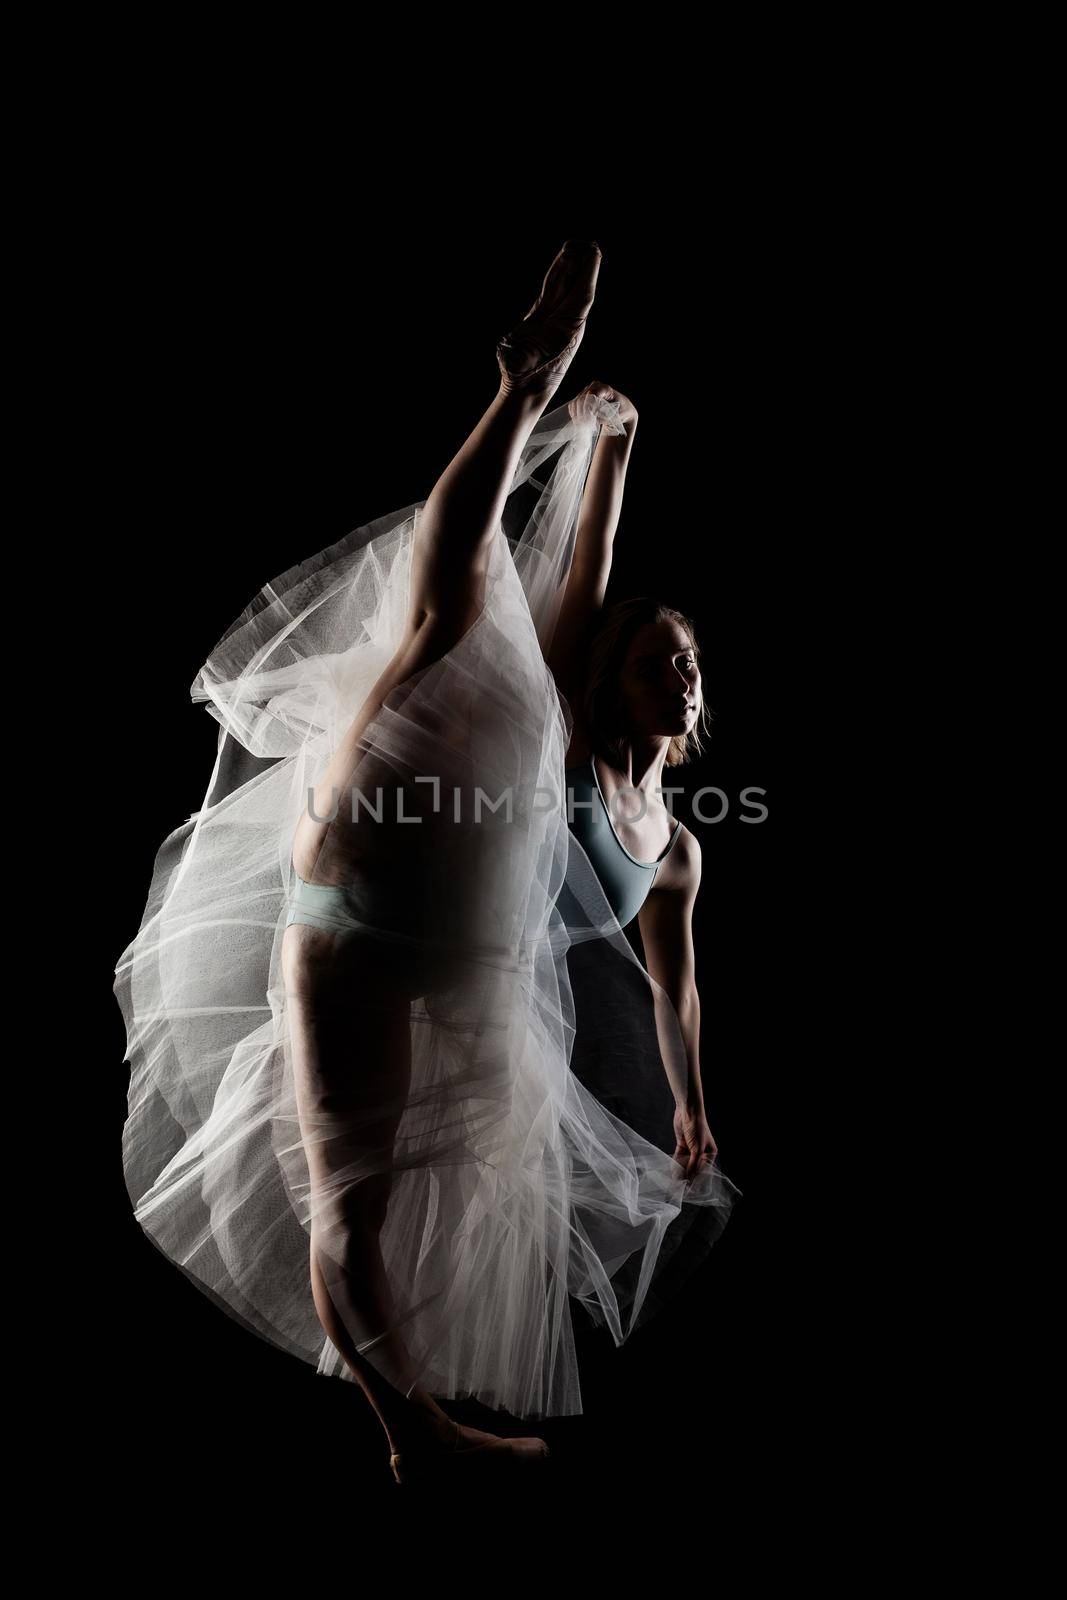 ballerina with a white dress and black top posing on black background by kokimk